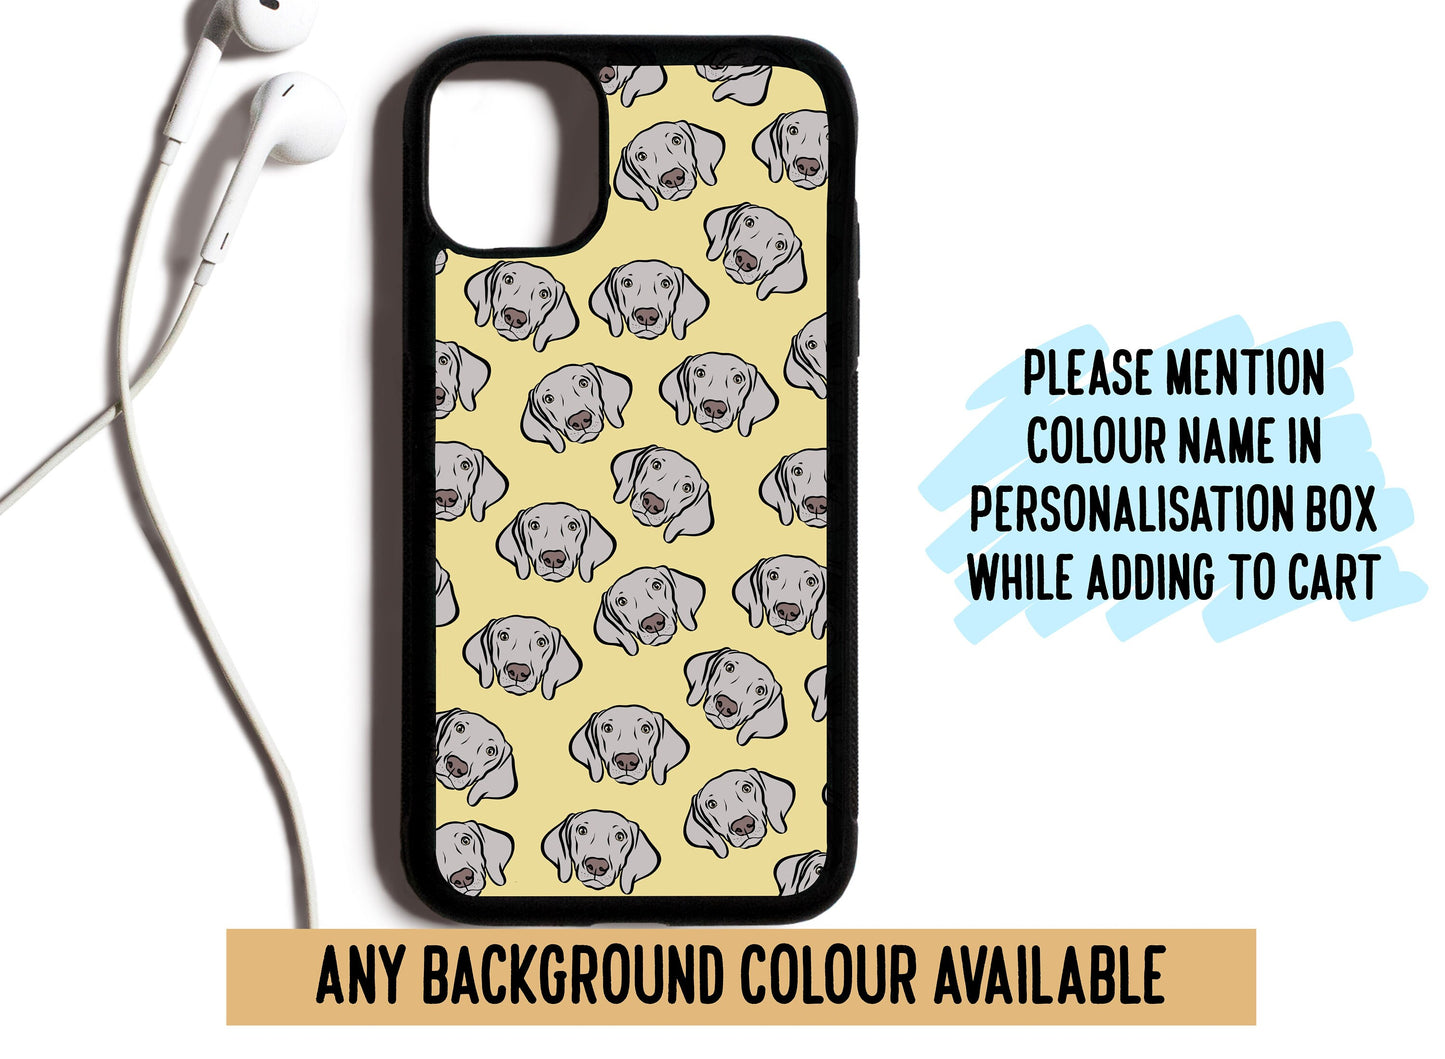 Weimaraner Face Phone Case/ Personalised Dog Breed Portrait Phone Case/ Cute Weimaraner Owner Gift/ Adorable Dog Phone Accessory/ Pet Gifts